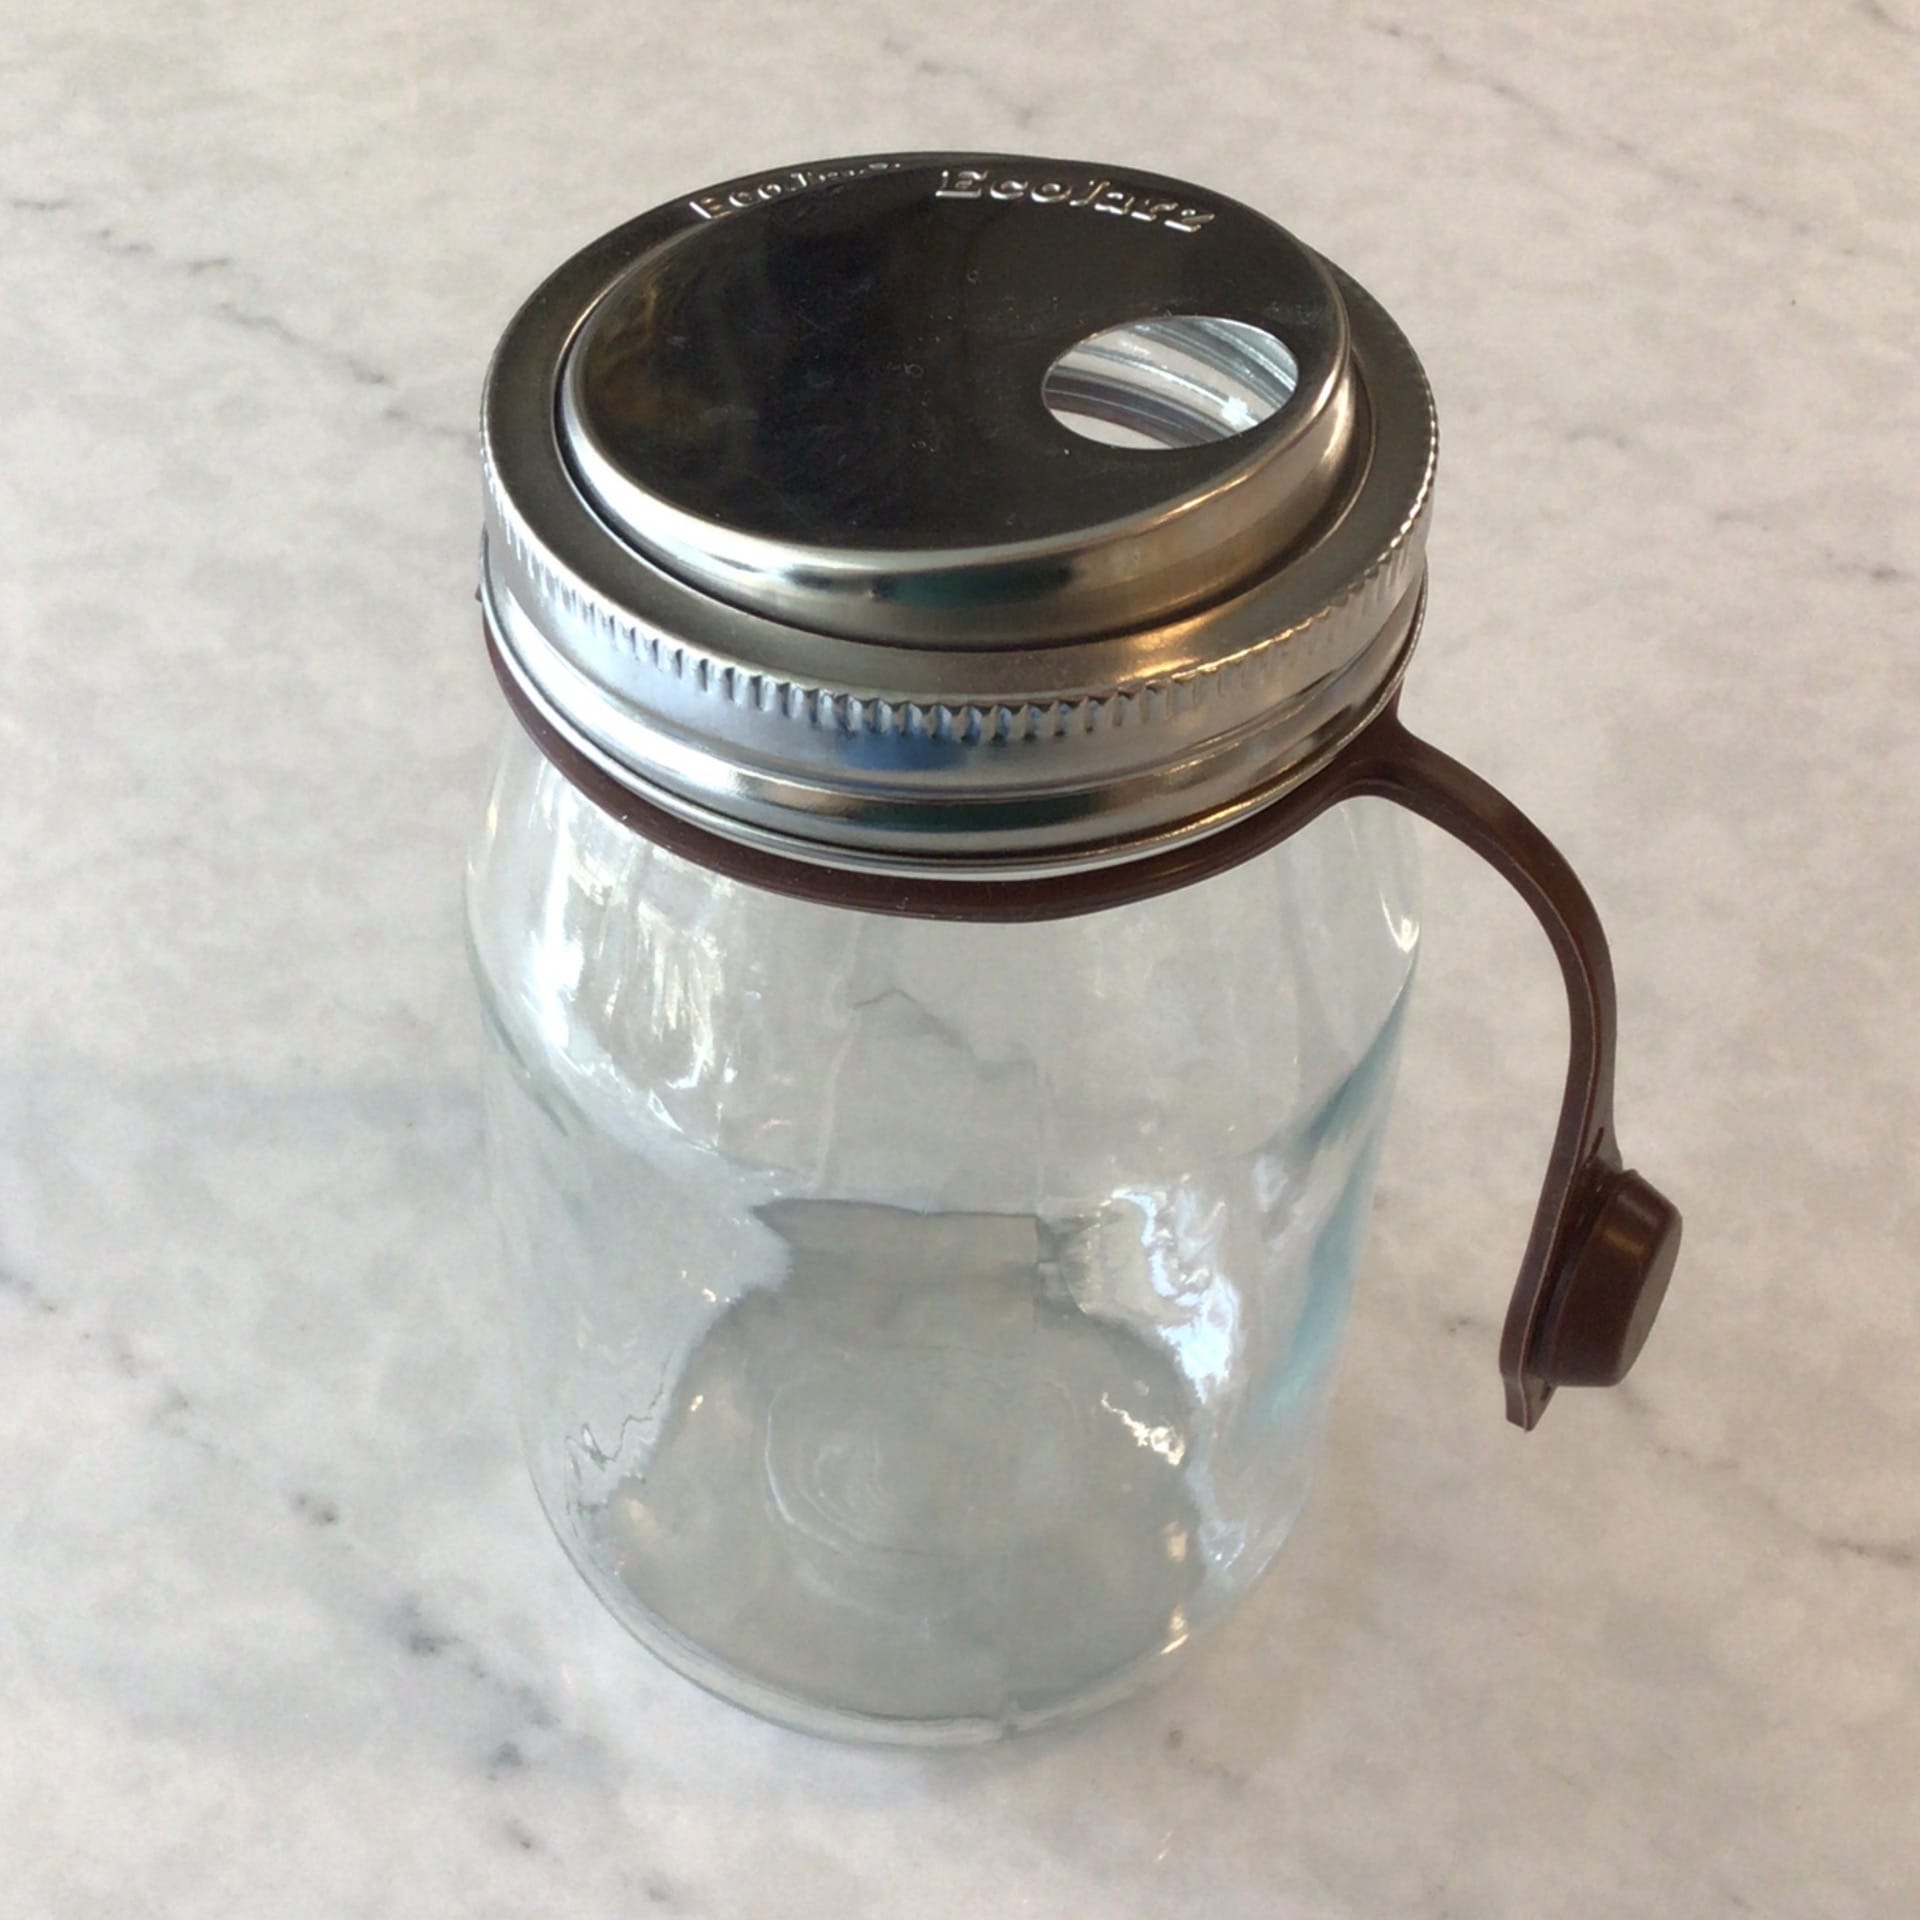 https://ex9gmccx2pn.exactdn.com/wp-content/uploads/2023/02/ecojarz-stainless-steel-wide-mouth-drinking-lid-with-pop-top.jpeg